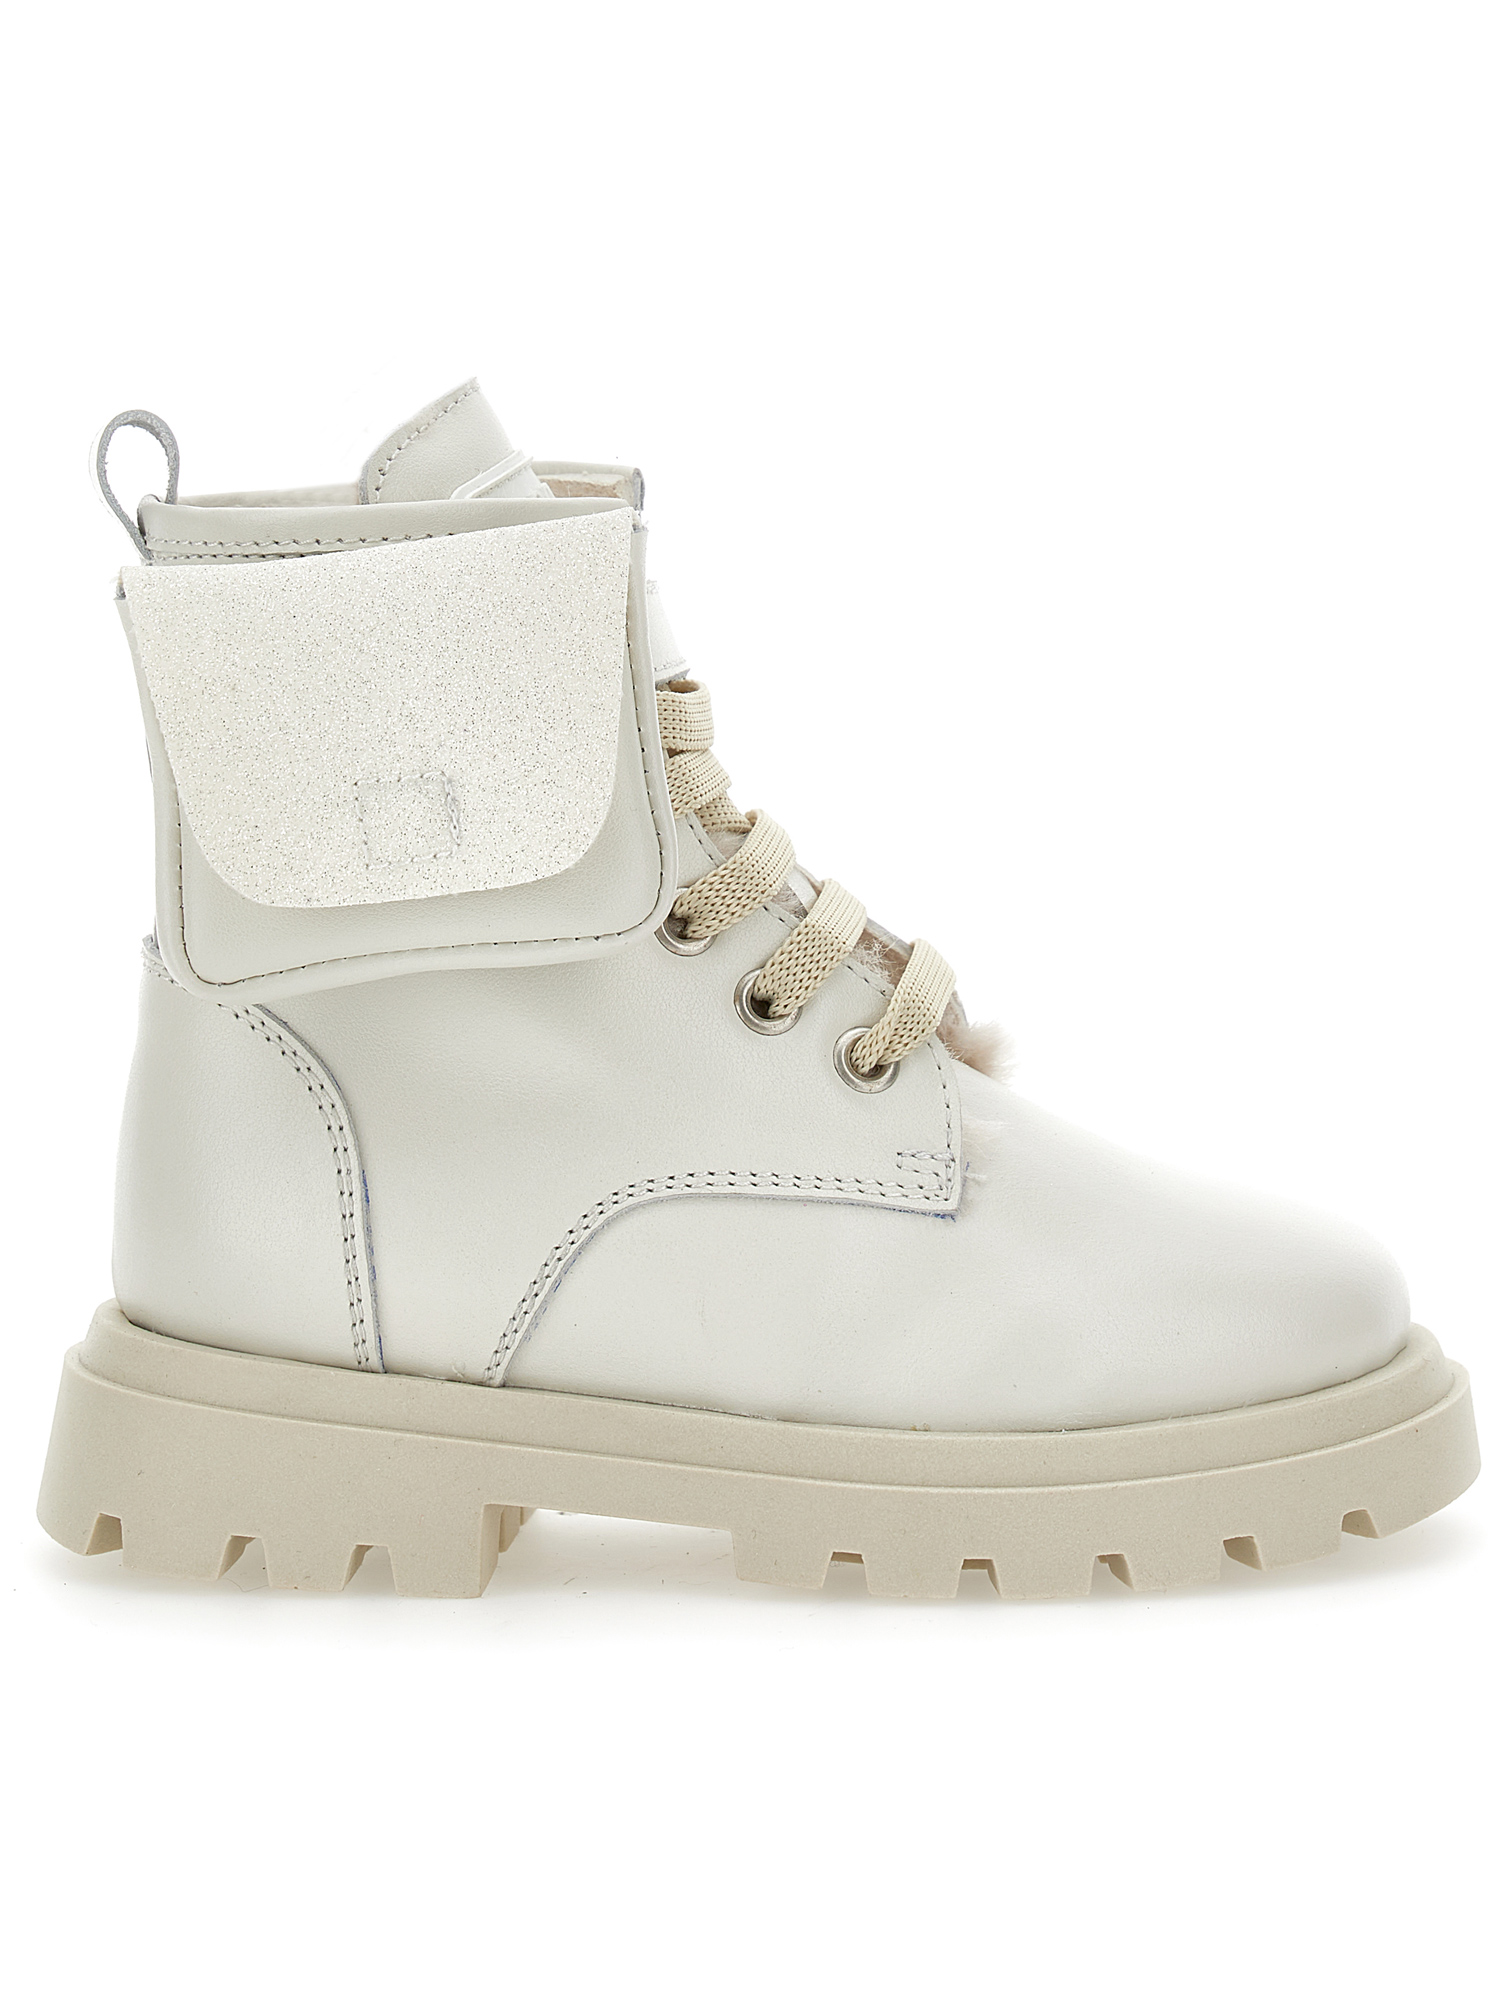 Monnalisa Leather Boots With Pocket In Cream